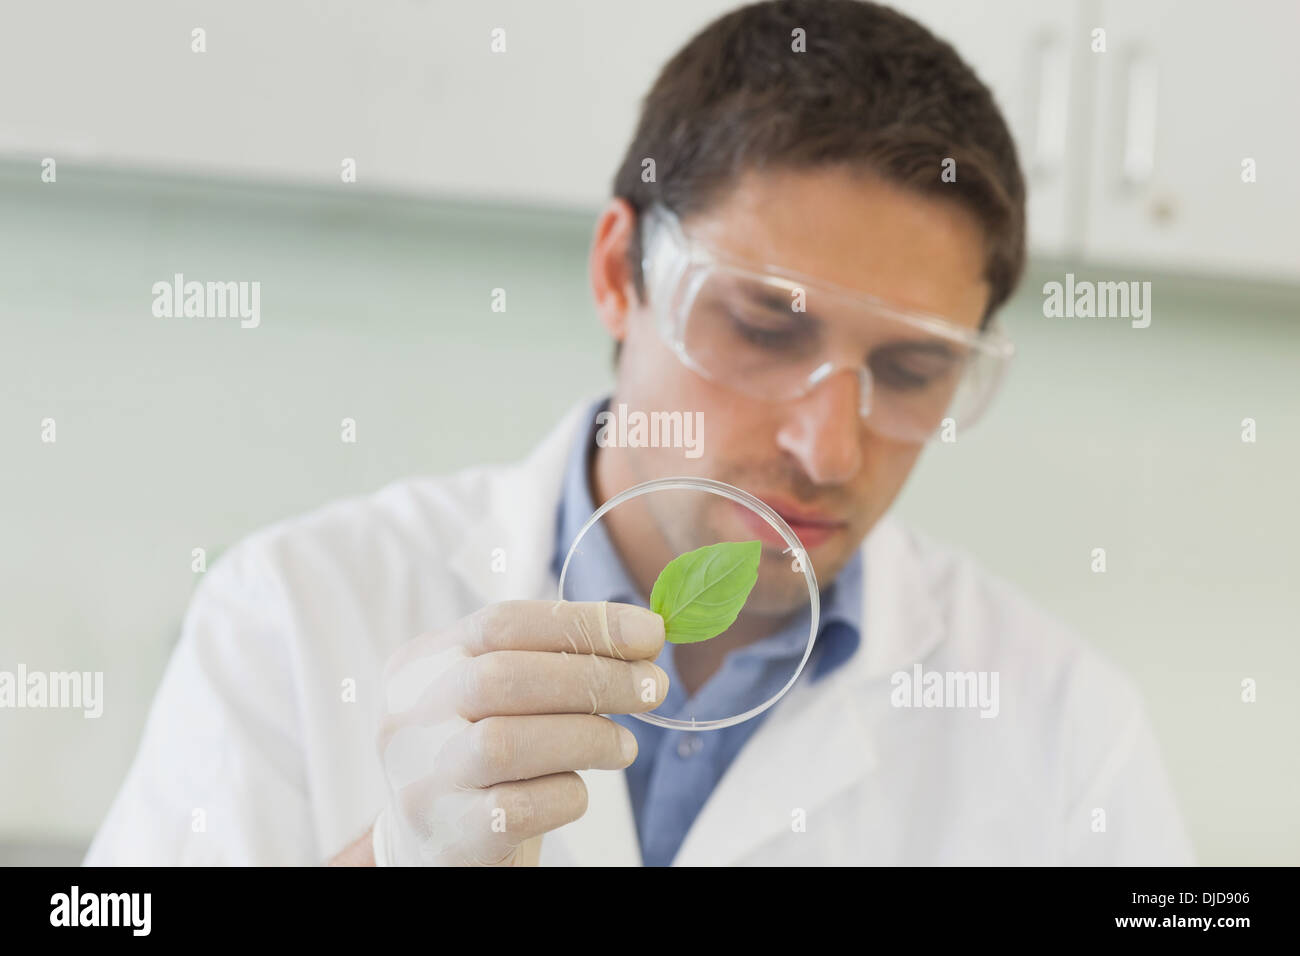 Attractive male scientist holding a petri dish Banque D'Images